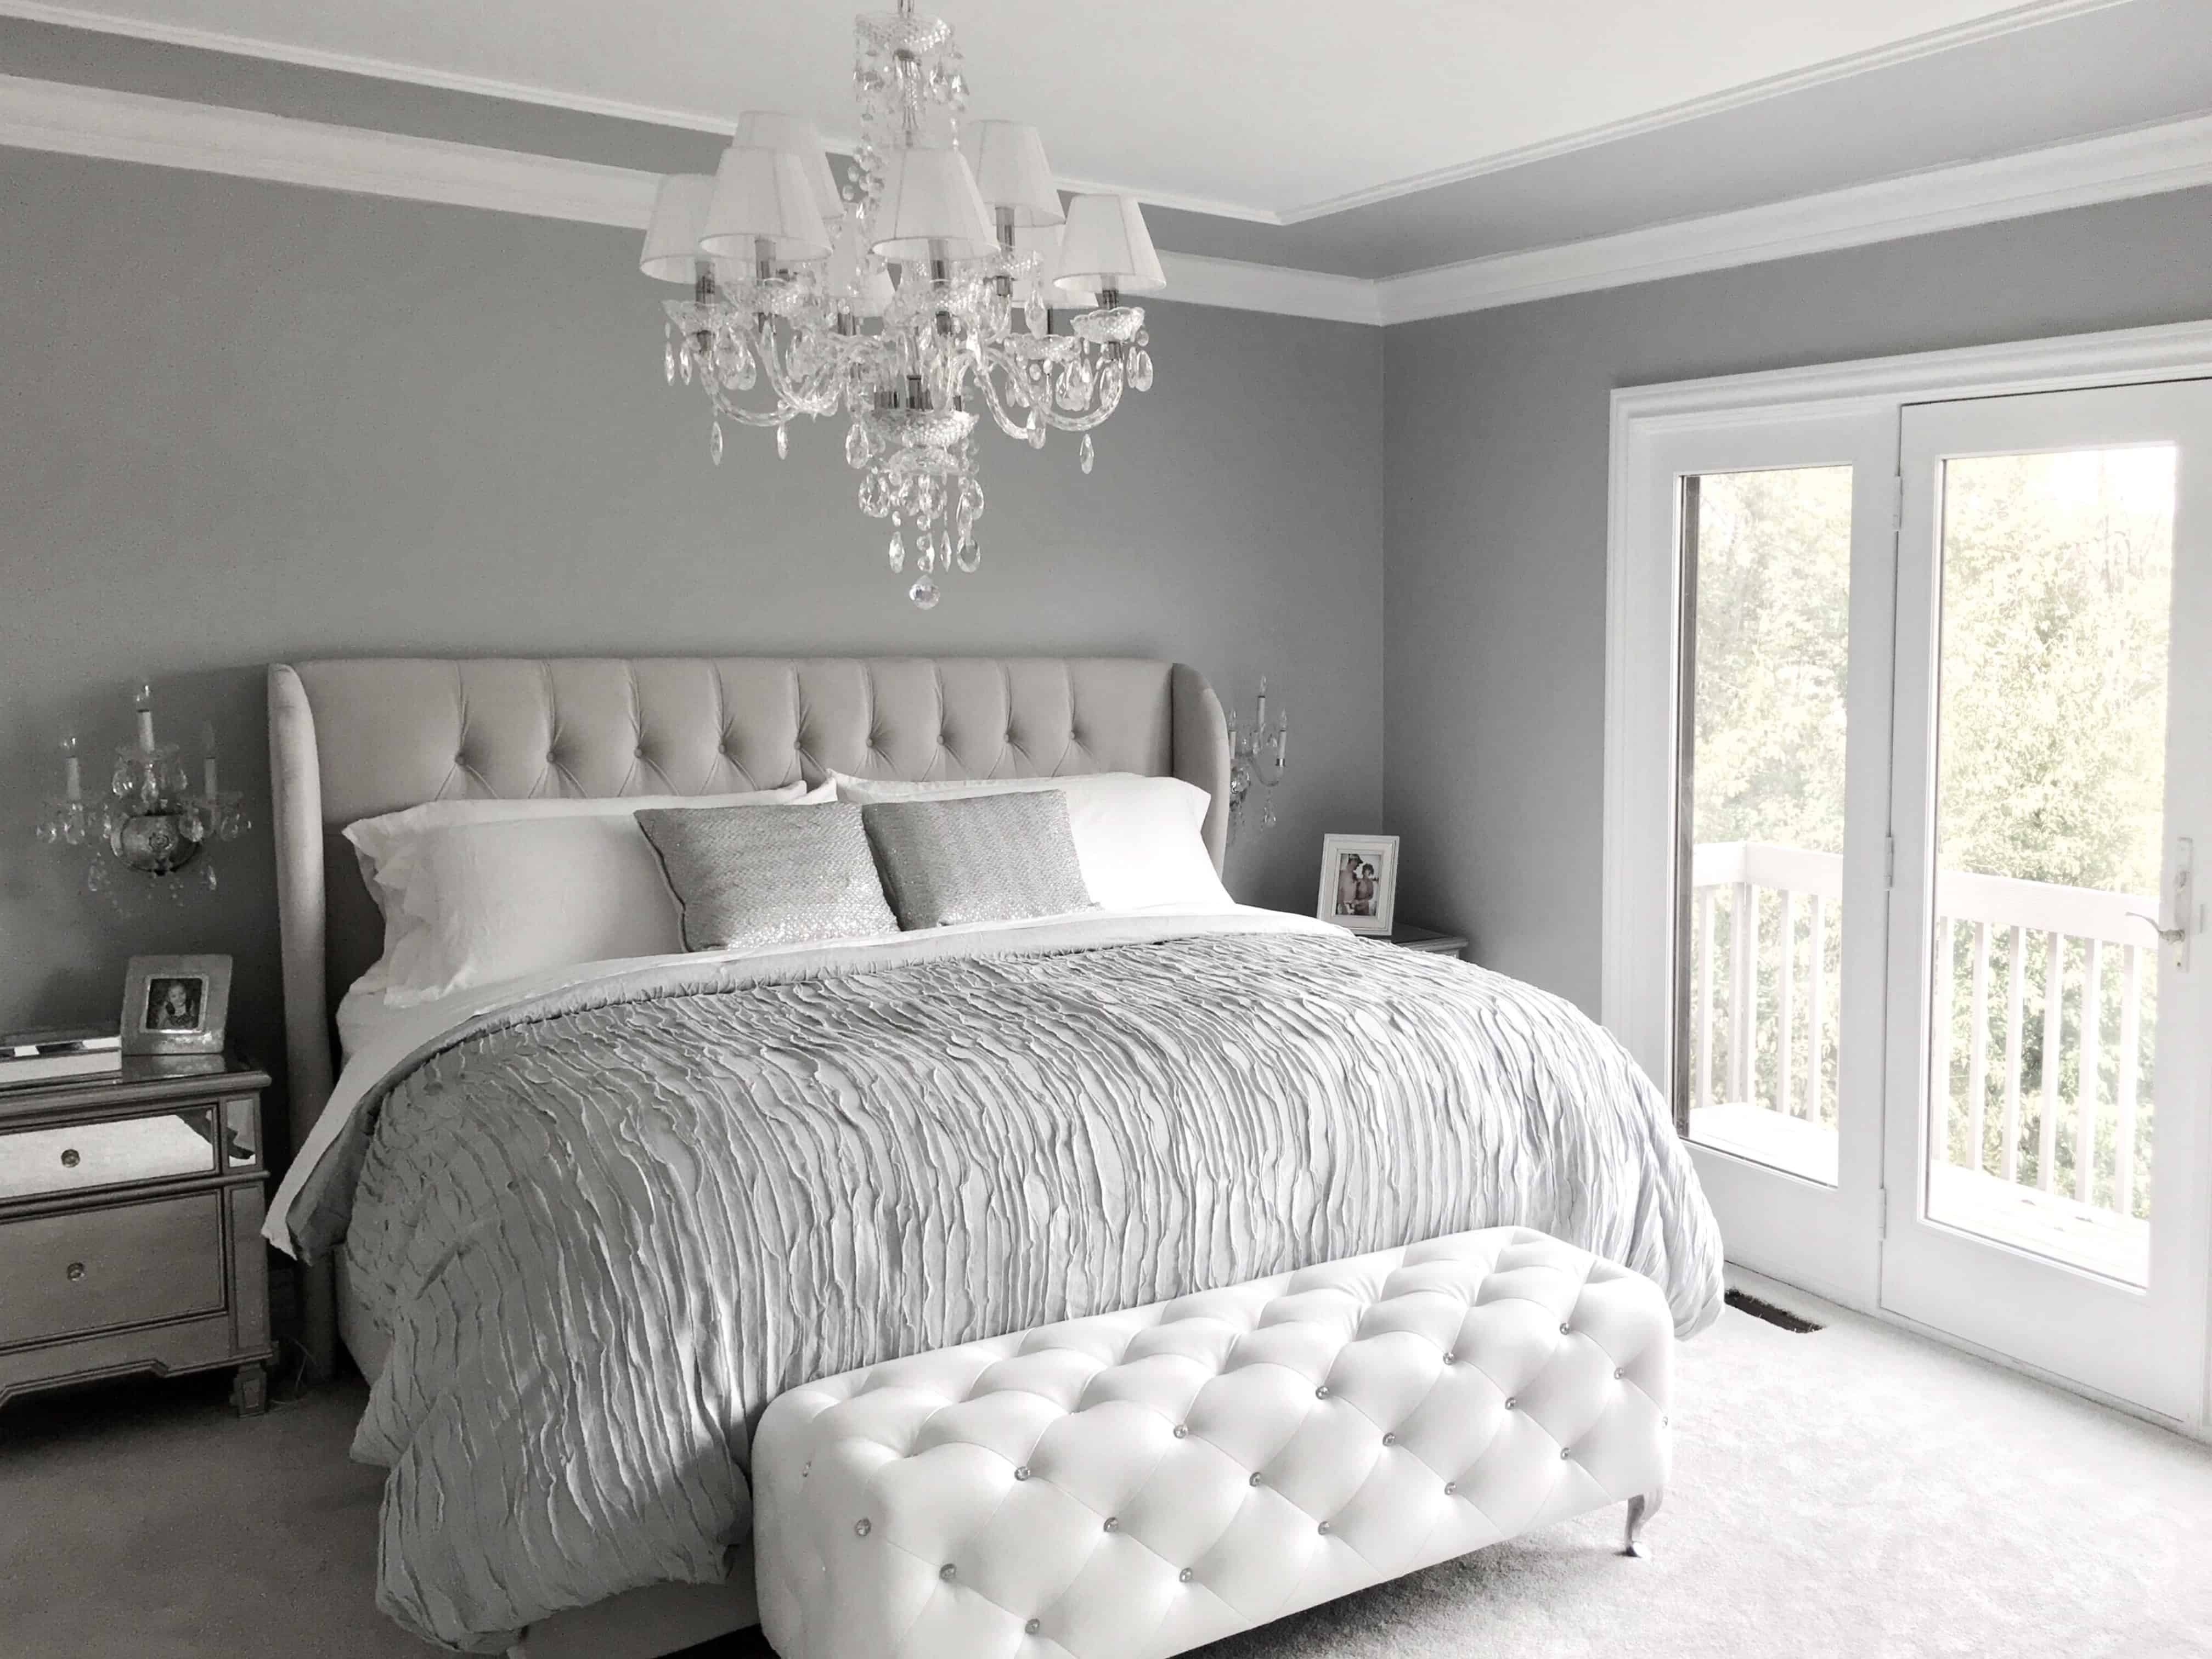 Furniture Pieces That Never Go Out Of Style, Upholstered Headboard Bedroom Furniture